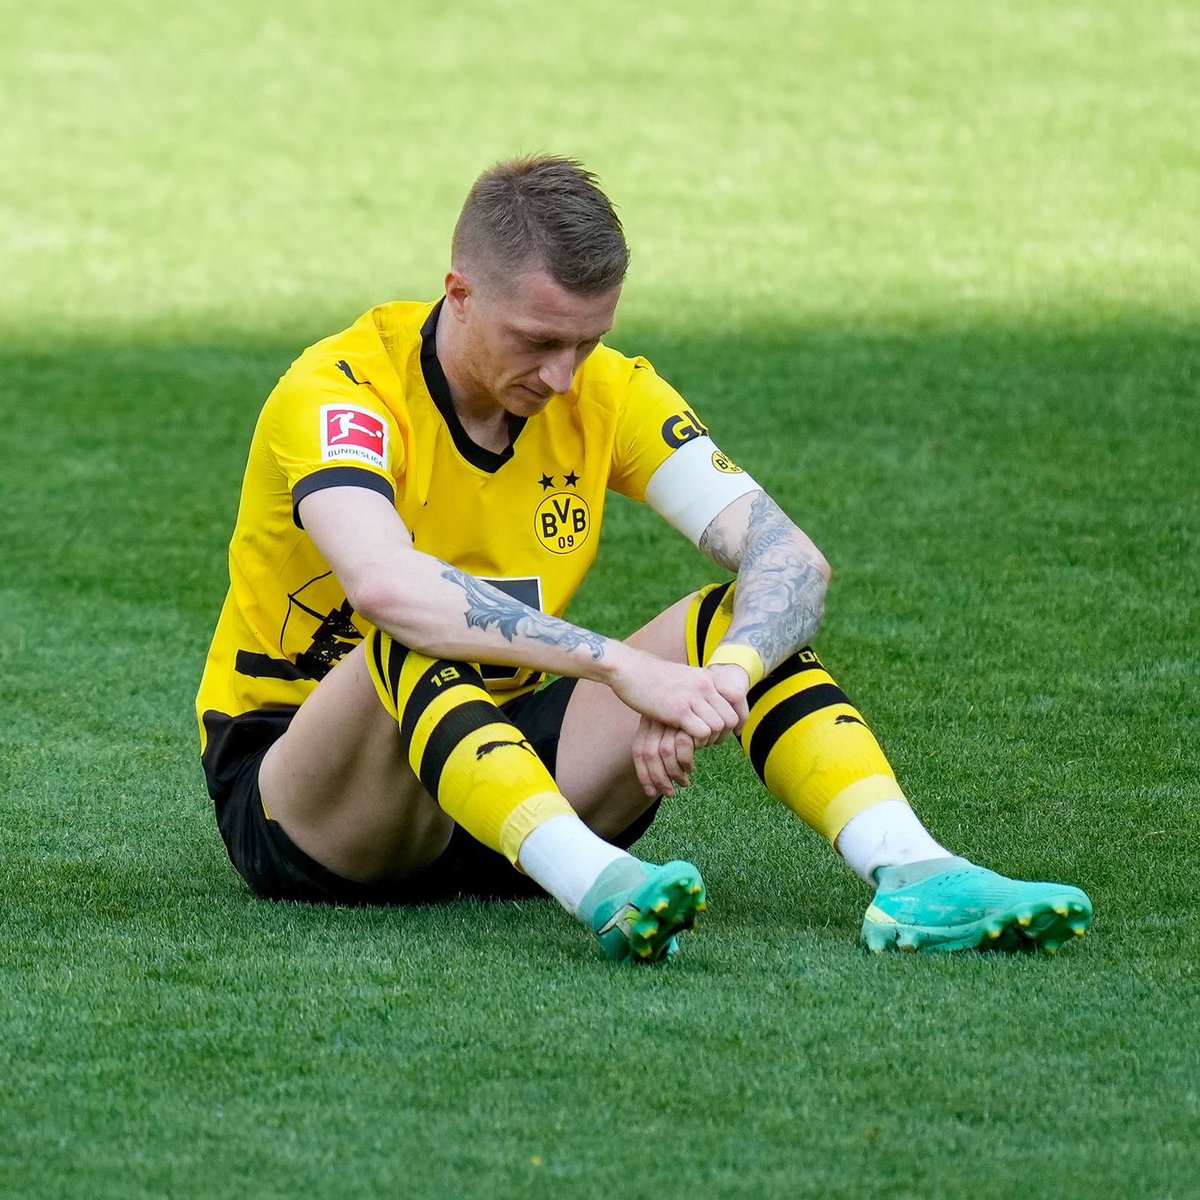 🗣️ Marco Reus: 'I would give all my money just to be healthy and play my career again without suffering the injuries.' 🙏

I think I speak for most fans when I say, I hope this man wins the Champions League later this month. 💛🖤